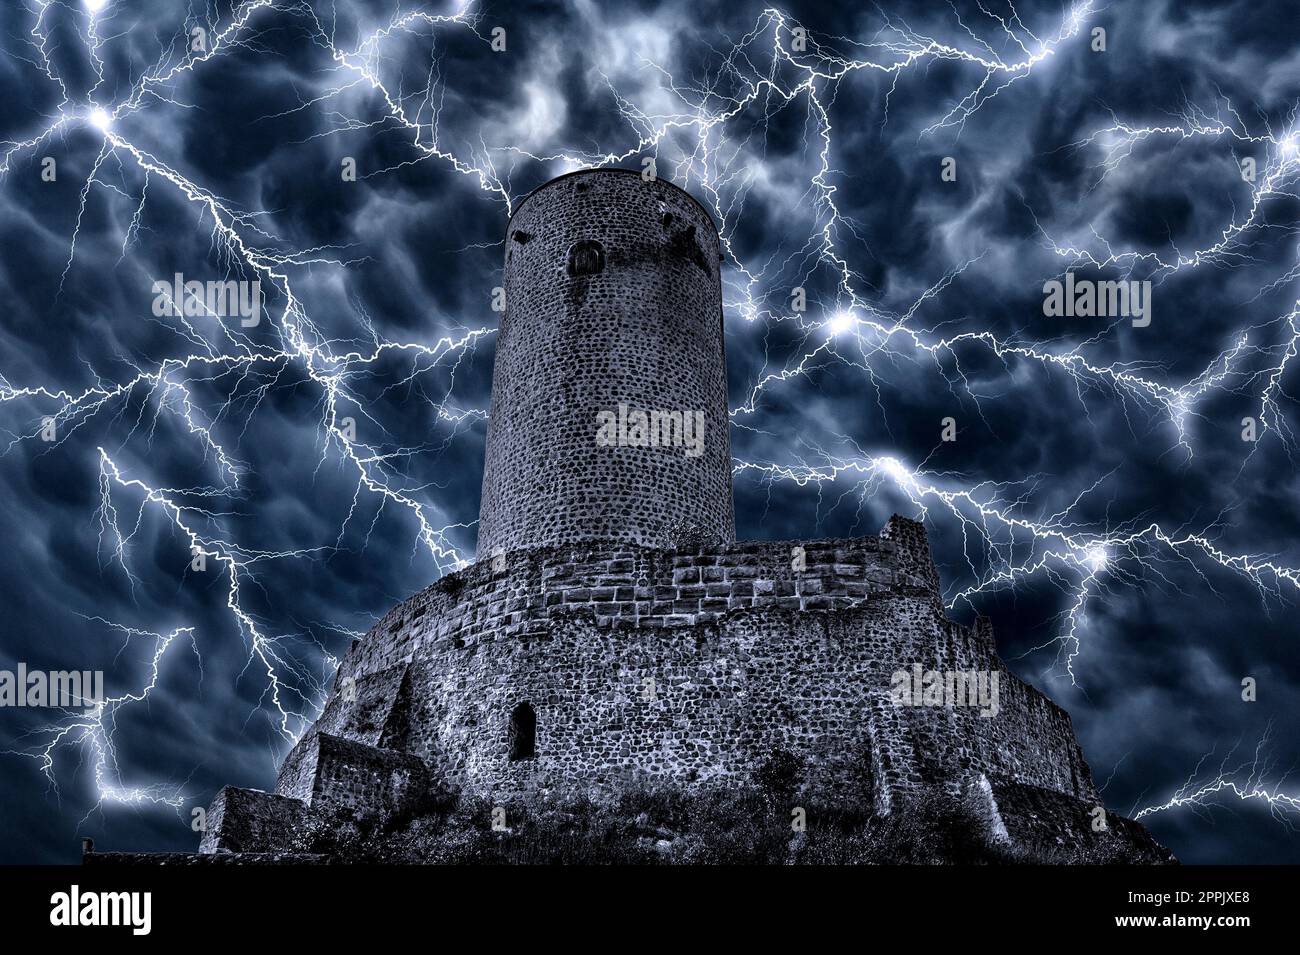 Ominous night sky with thunderstorms and lightning behind the dark facade of an old knight's castle Stock Photo